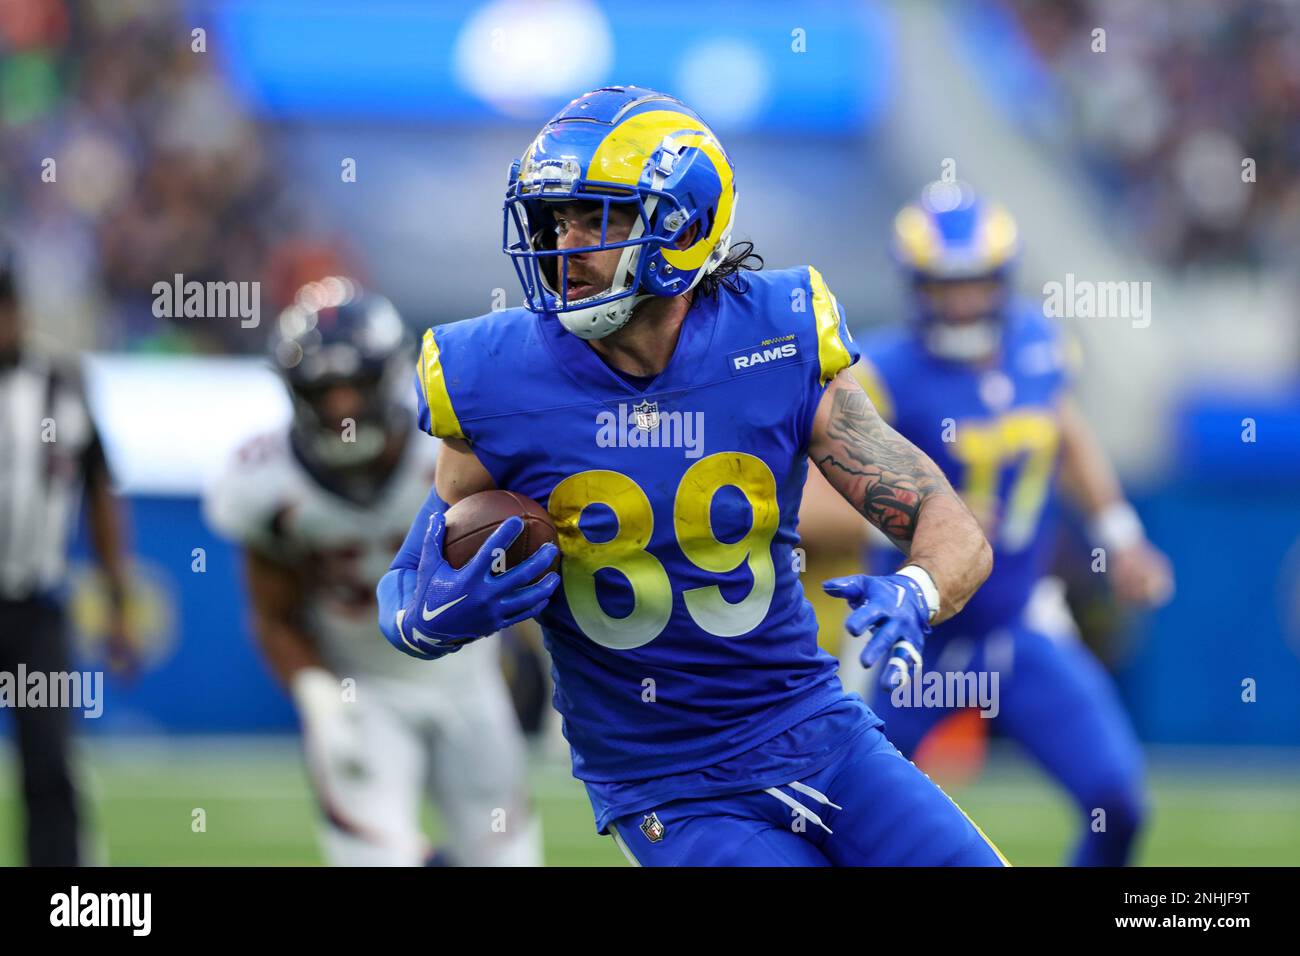 INGLEWOOD, CA - DECEMBER 25: Los Angeles Rams tight end Tyler Higbee (89)  catches the ball for a gain during the NFL game between the Denver Broncos  and the Los Angeles Rams